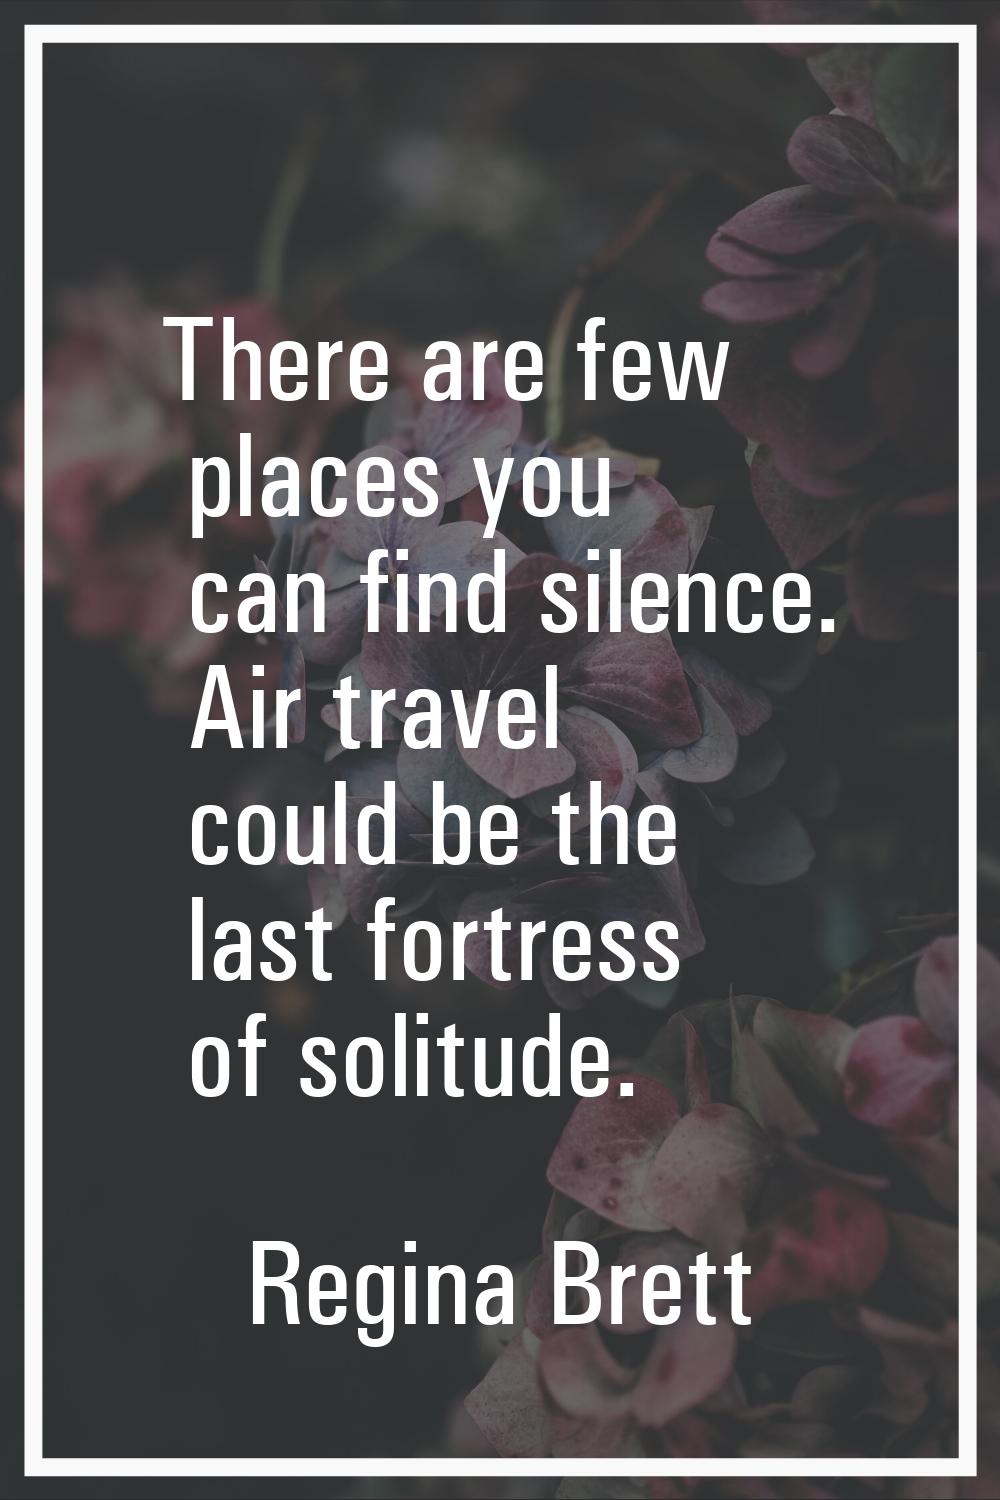 There are few places you can find silence. Air travel could be the last fortress of solitude.